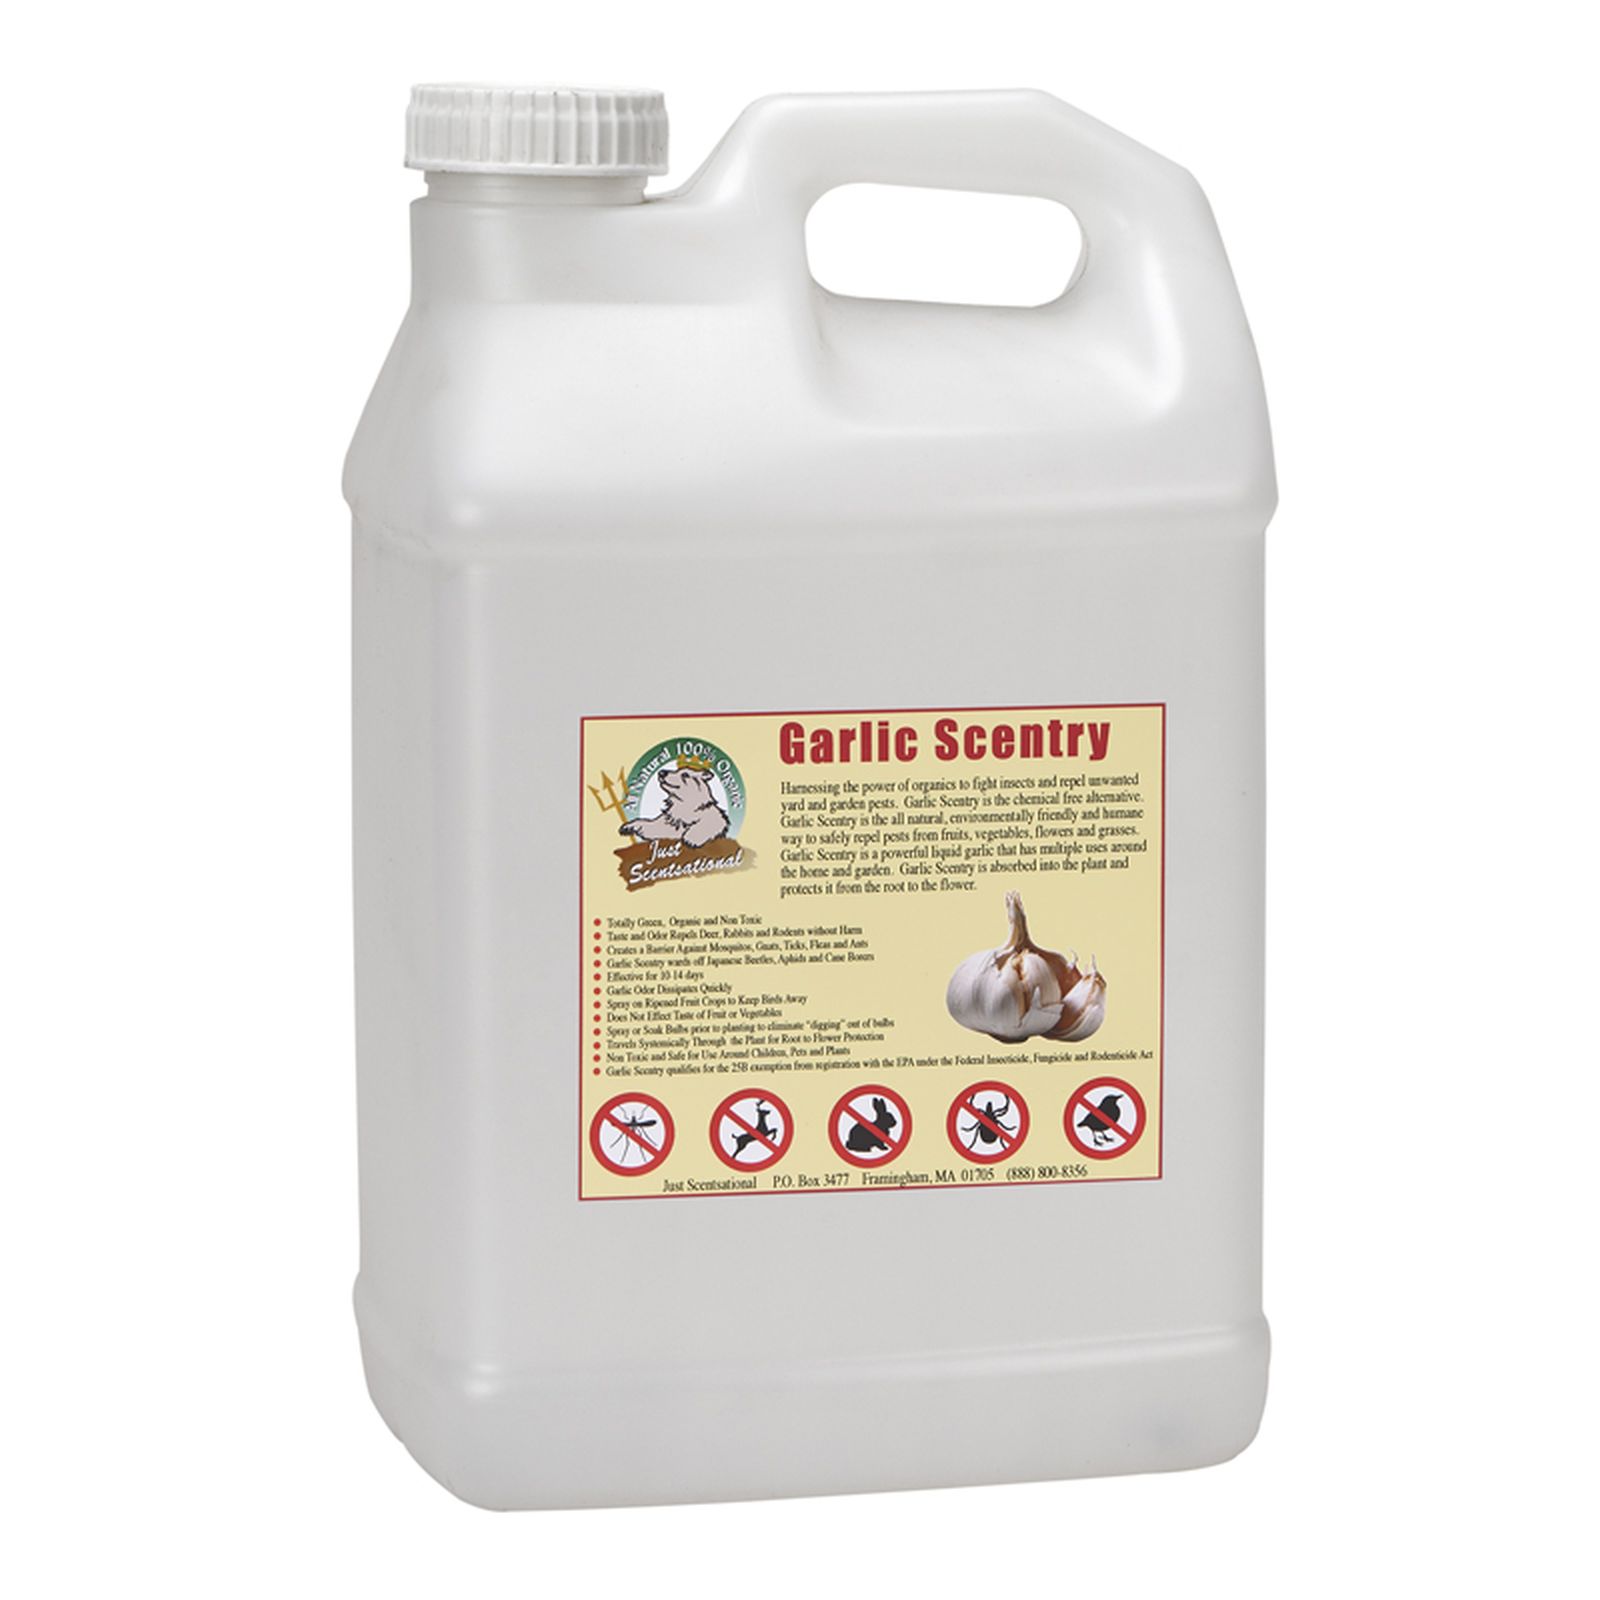 Just Scentsational 2.5 Gallon Ready to use garlic Scentry Formula